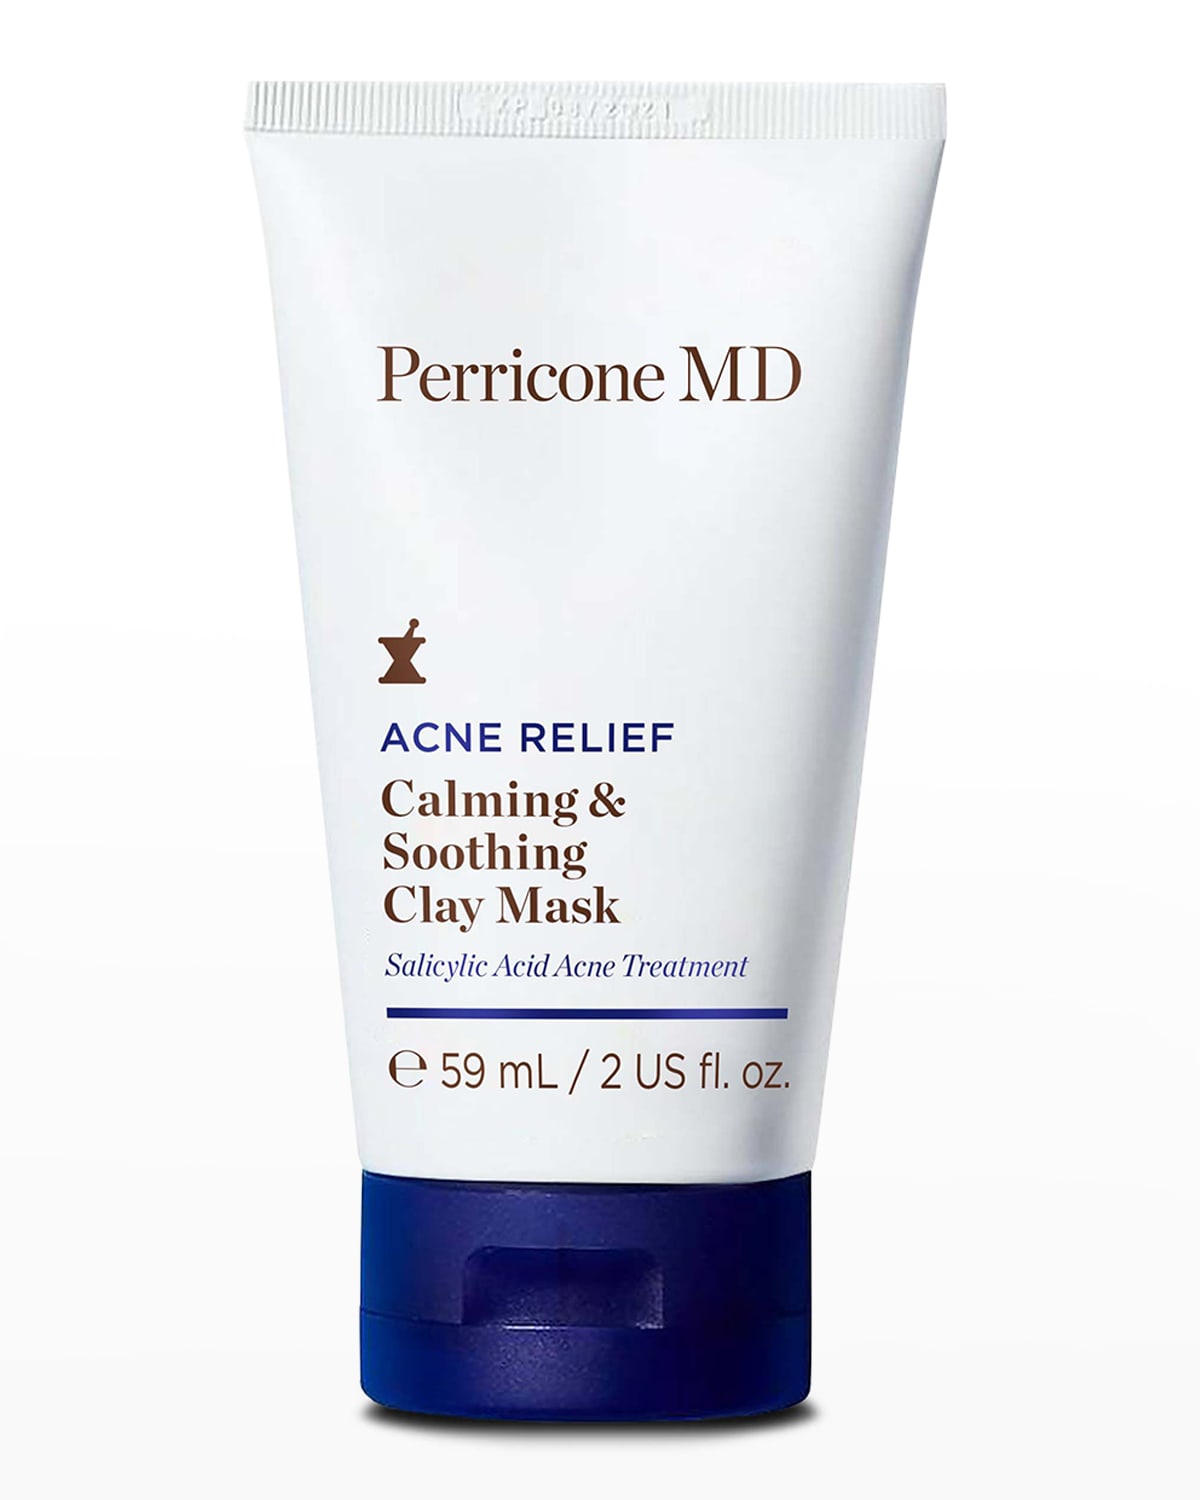 Acne Relief Calming & Soothing Clay Mask, 2 oz.